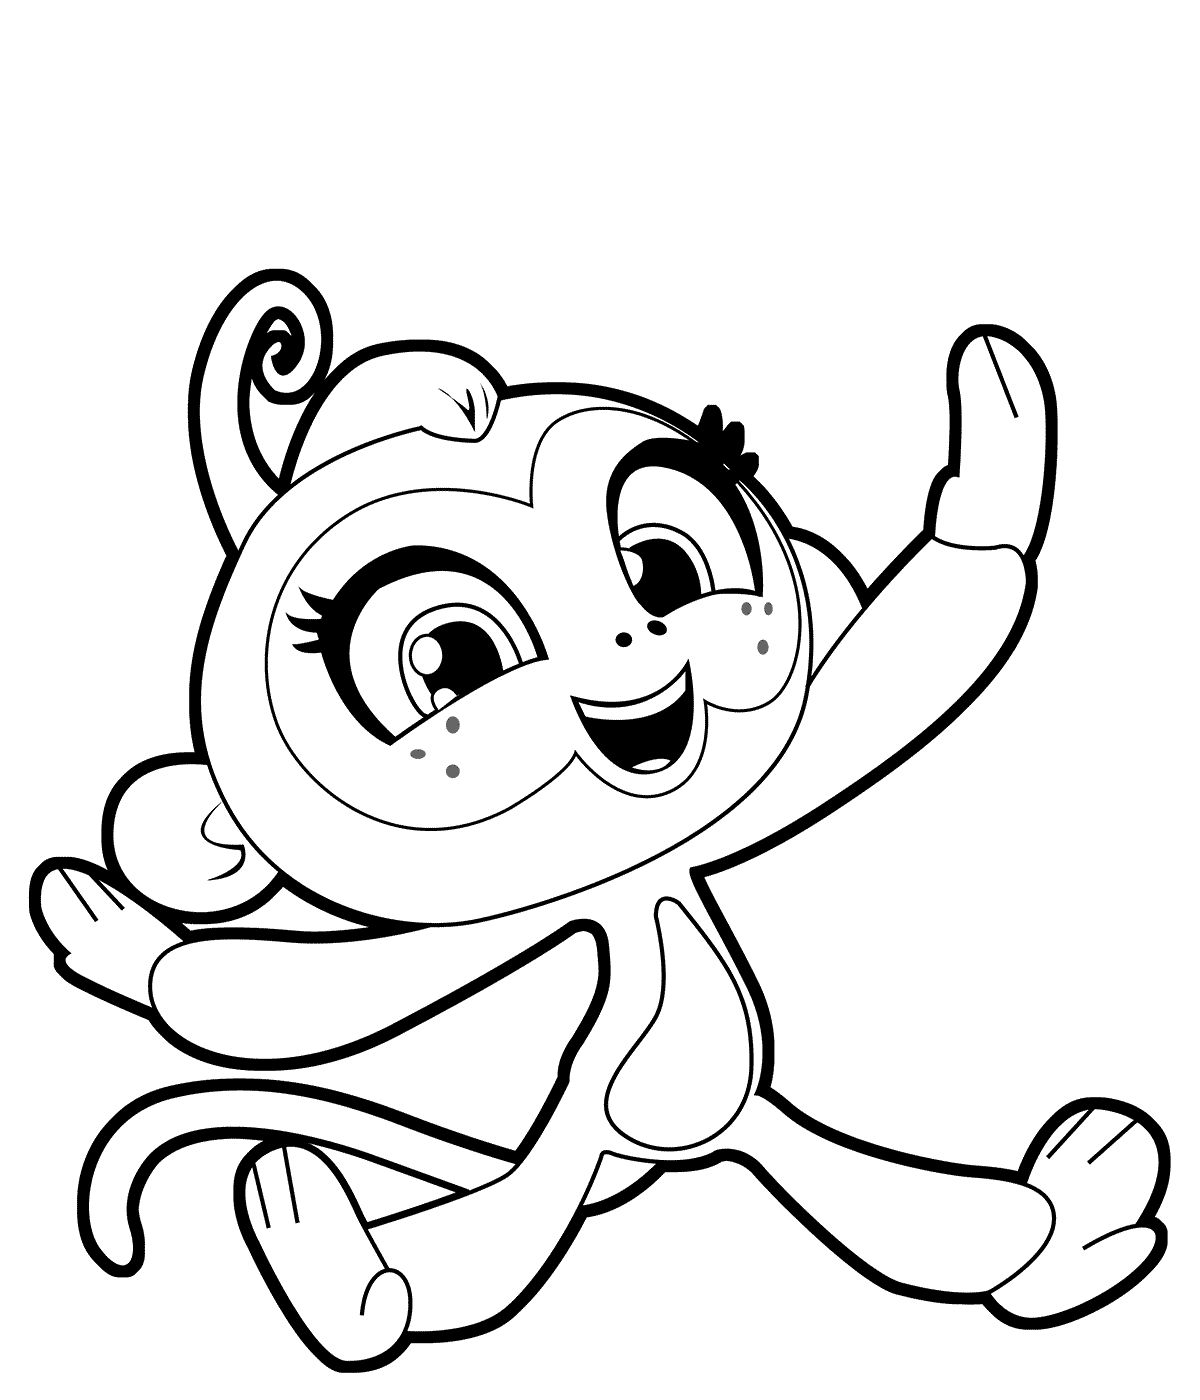 Fingerlings Coloring Pages